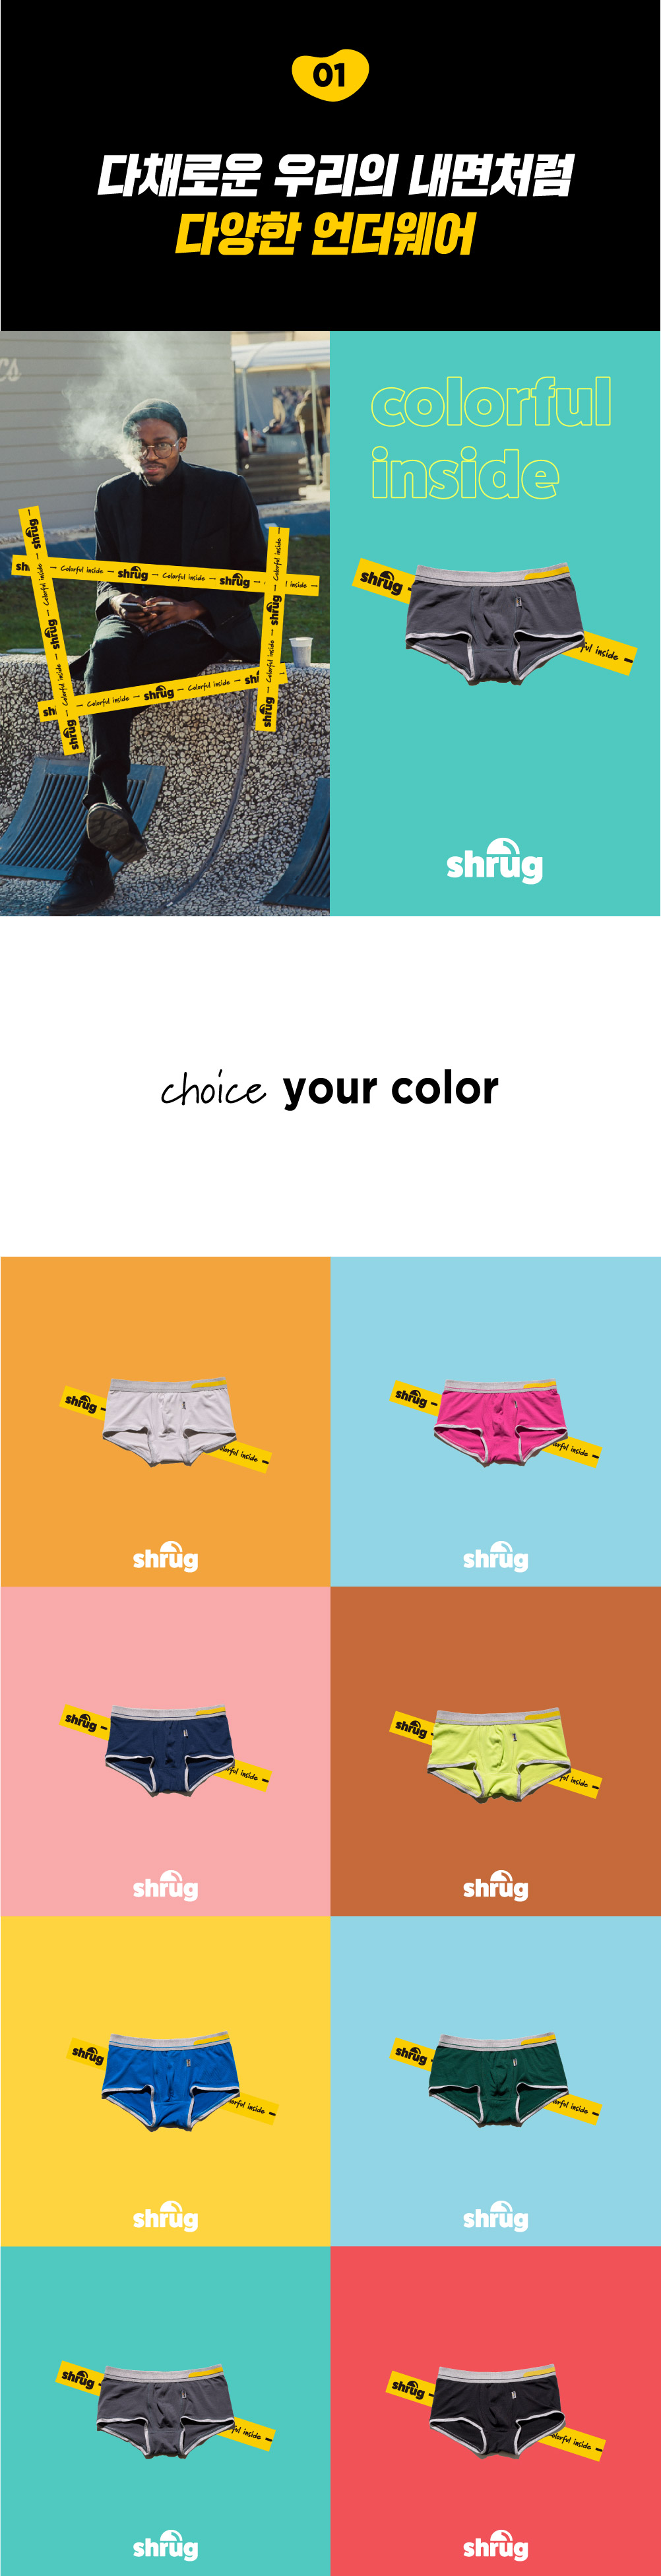 choice your color